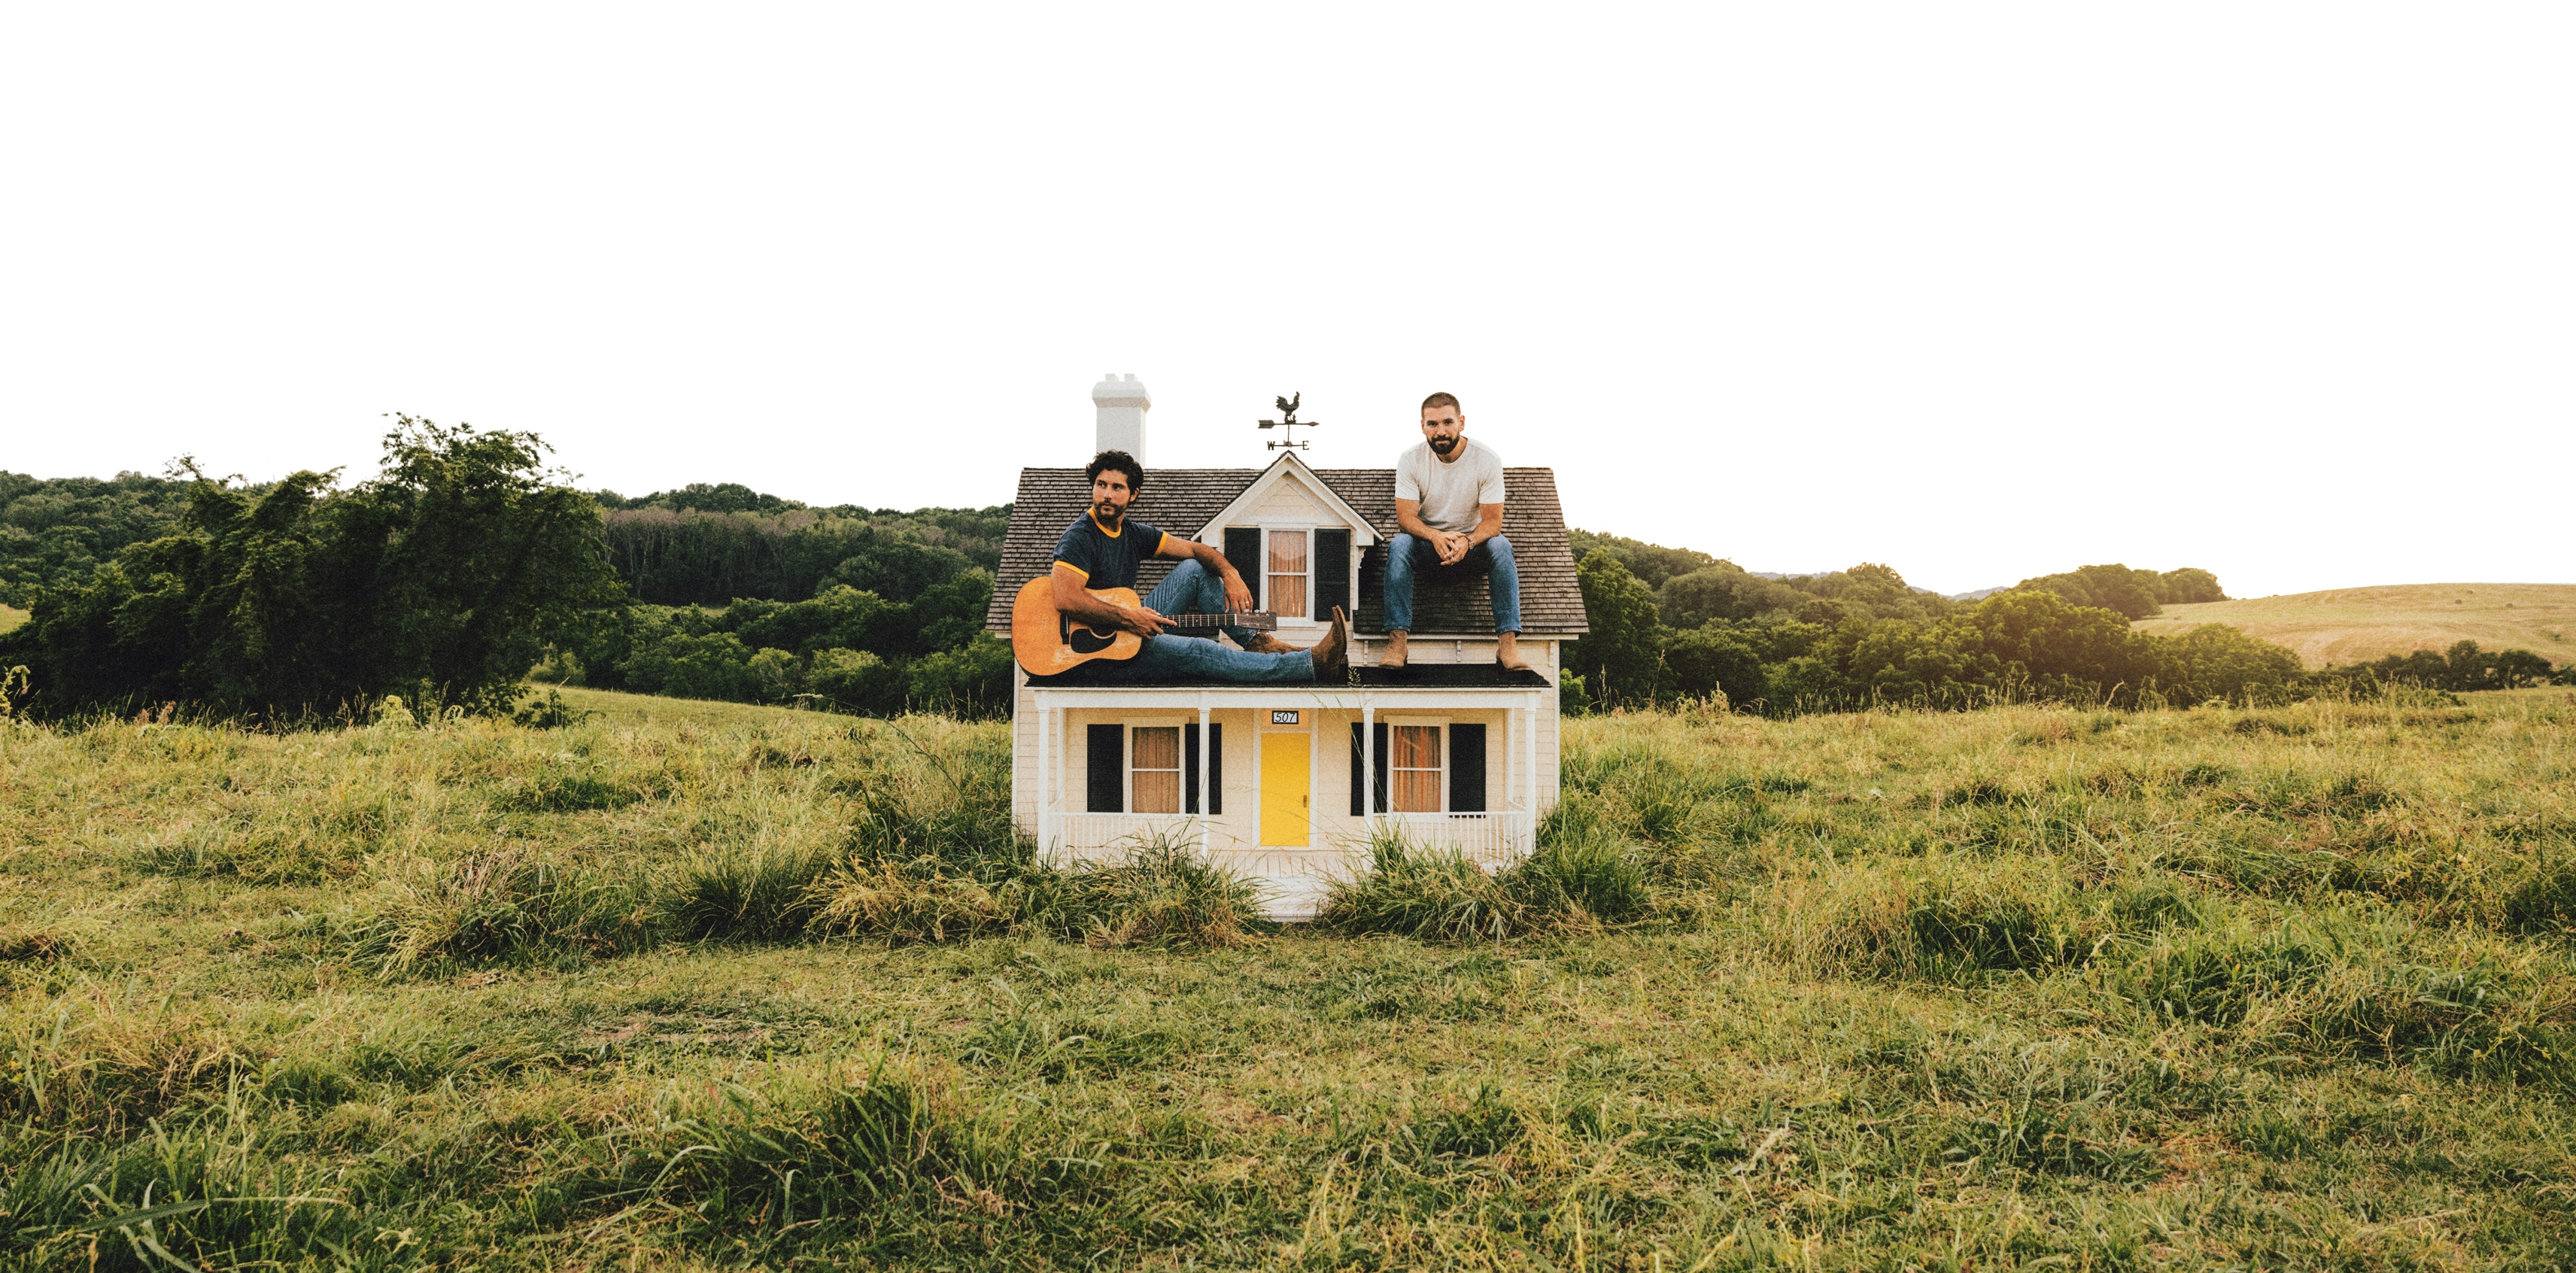 New Music Friday: Dan + Shay Release Three New Tracks Ahead of the Release of Their Forthcoming Project, “Bigger Houses,” on September 15th